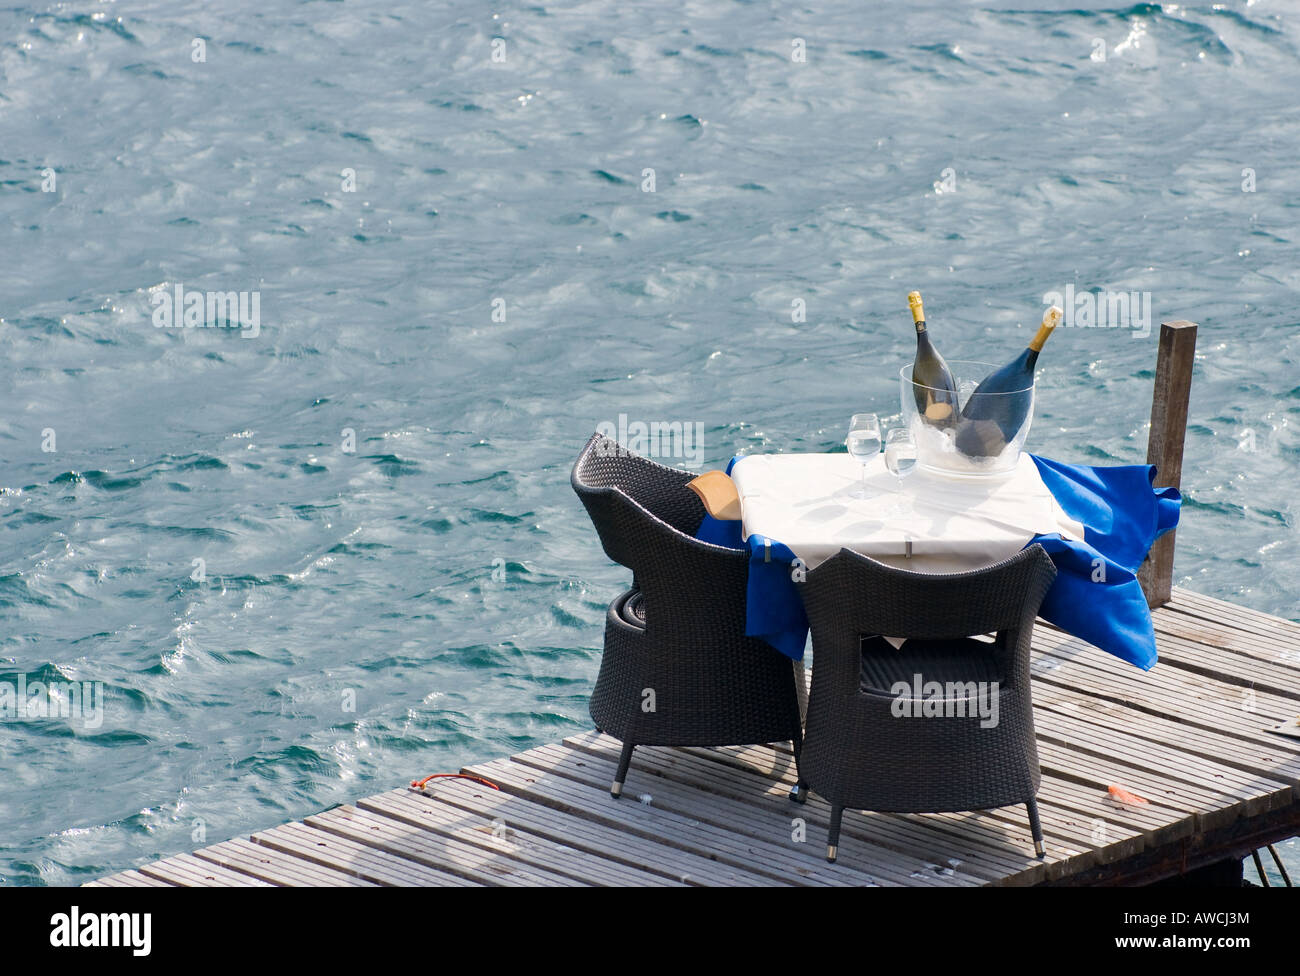 A romantic table for two on the sea Stock Photo